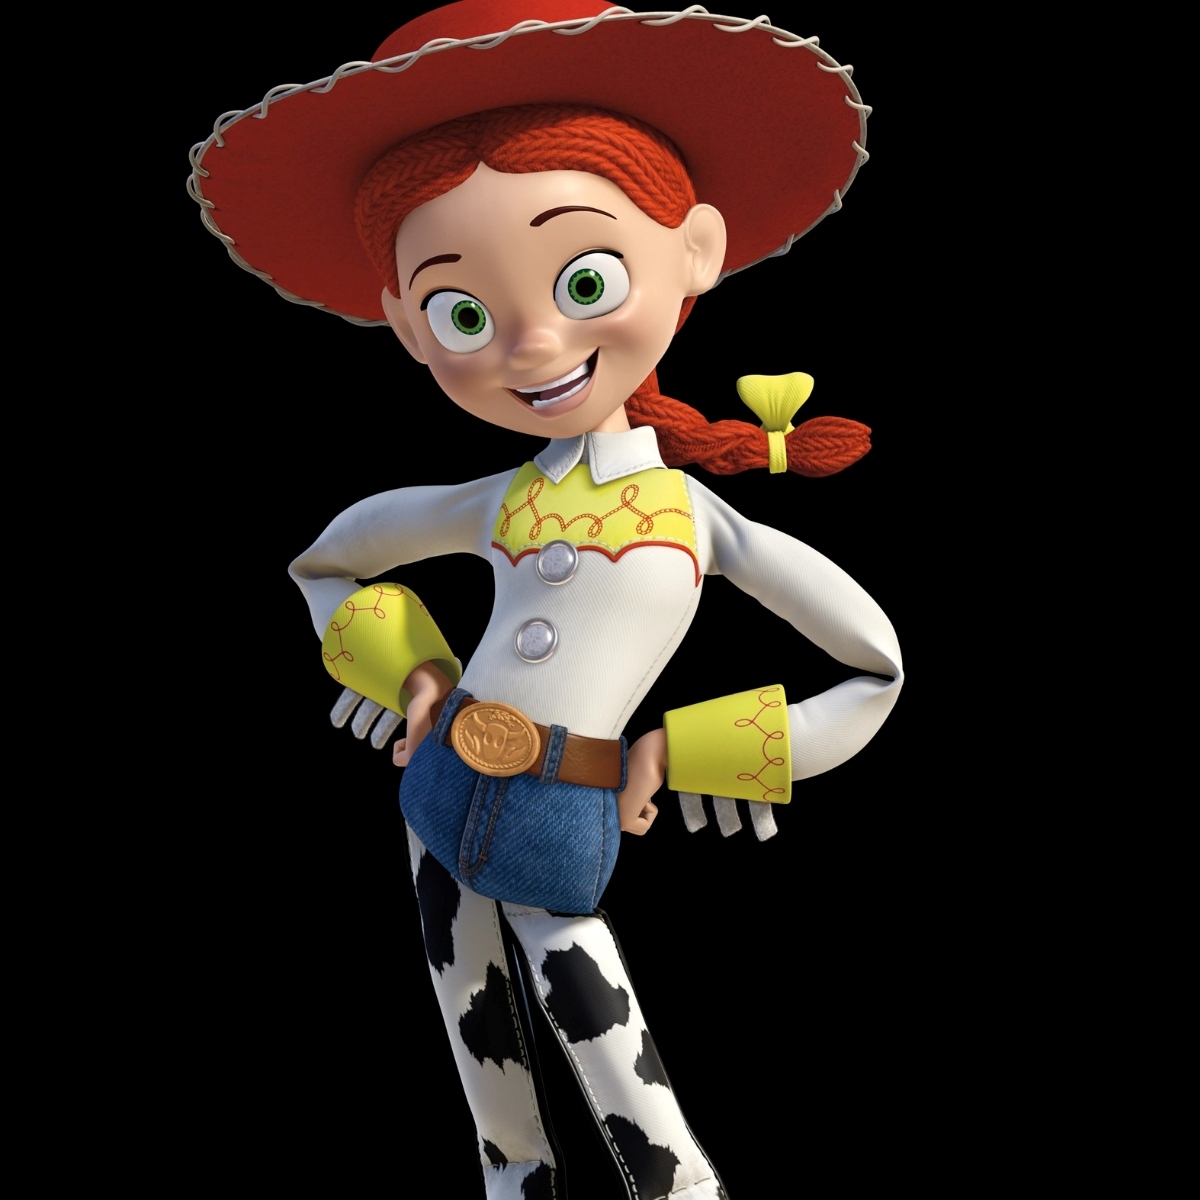 Even Toys Have Responsibilities: Character Growth in Toy Story 2